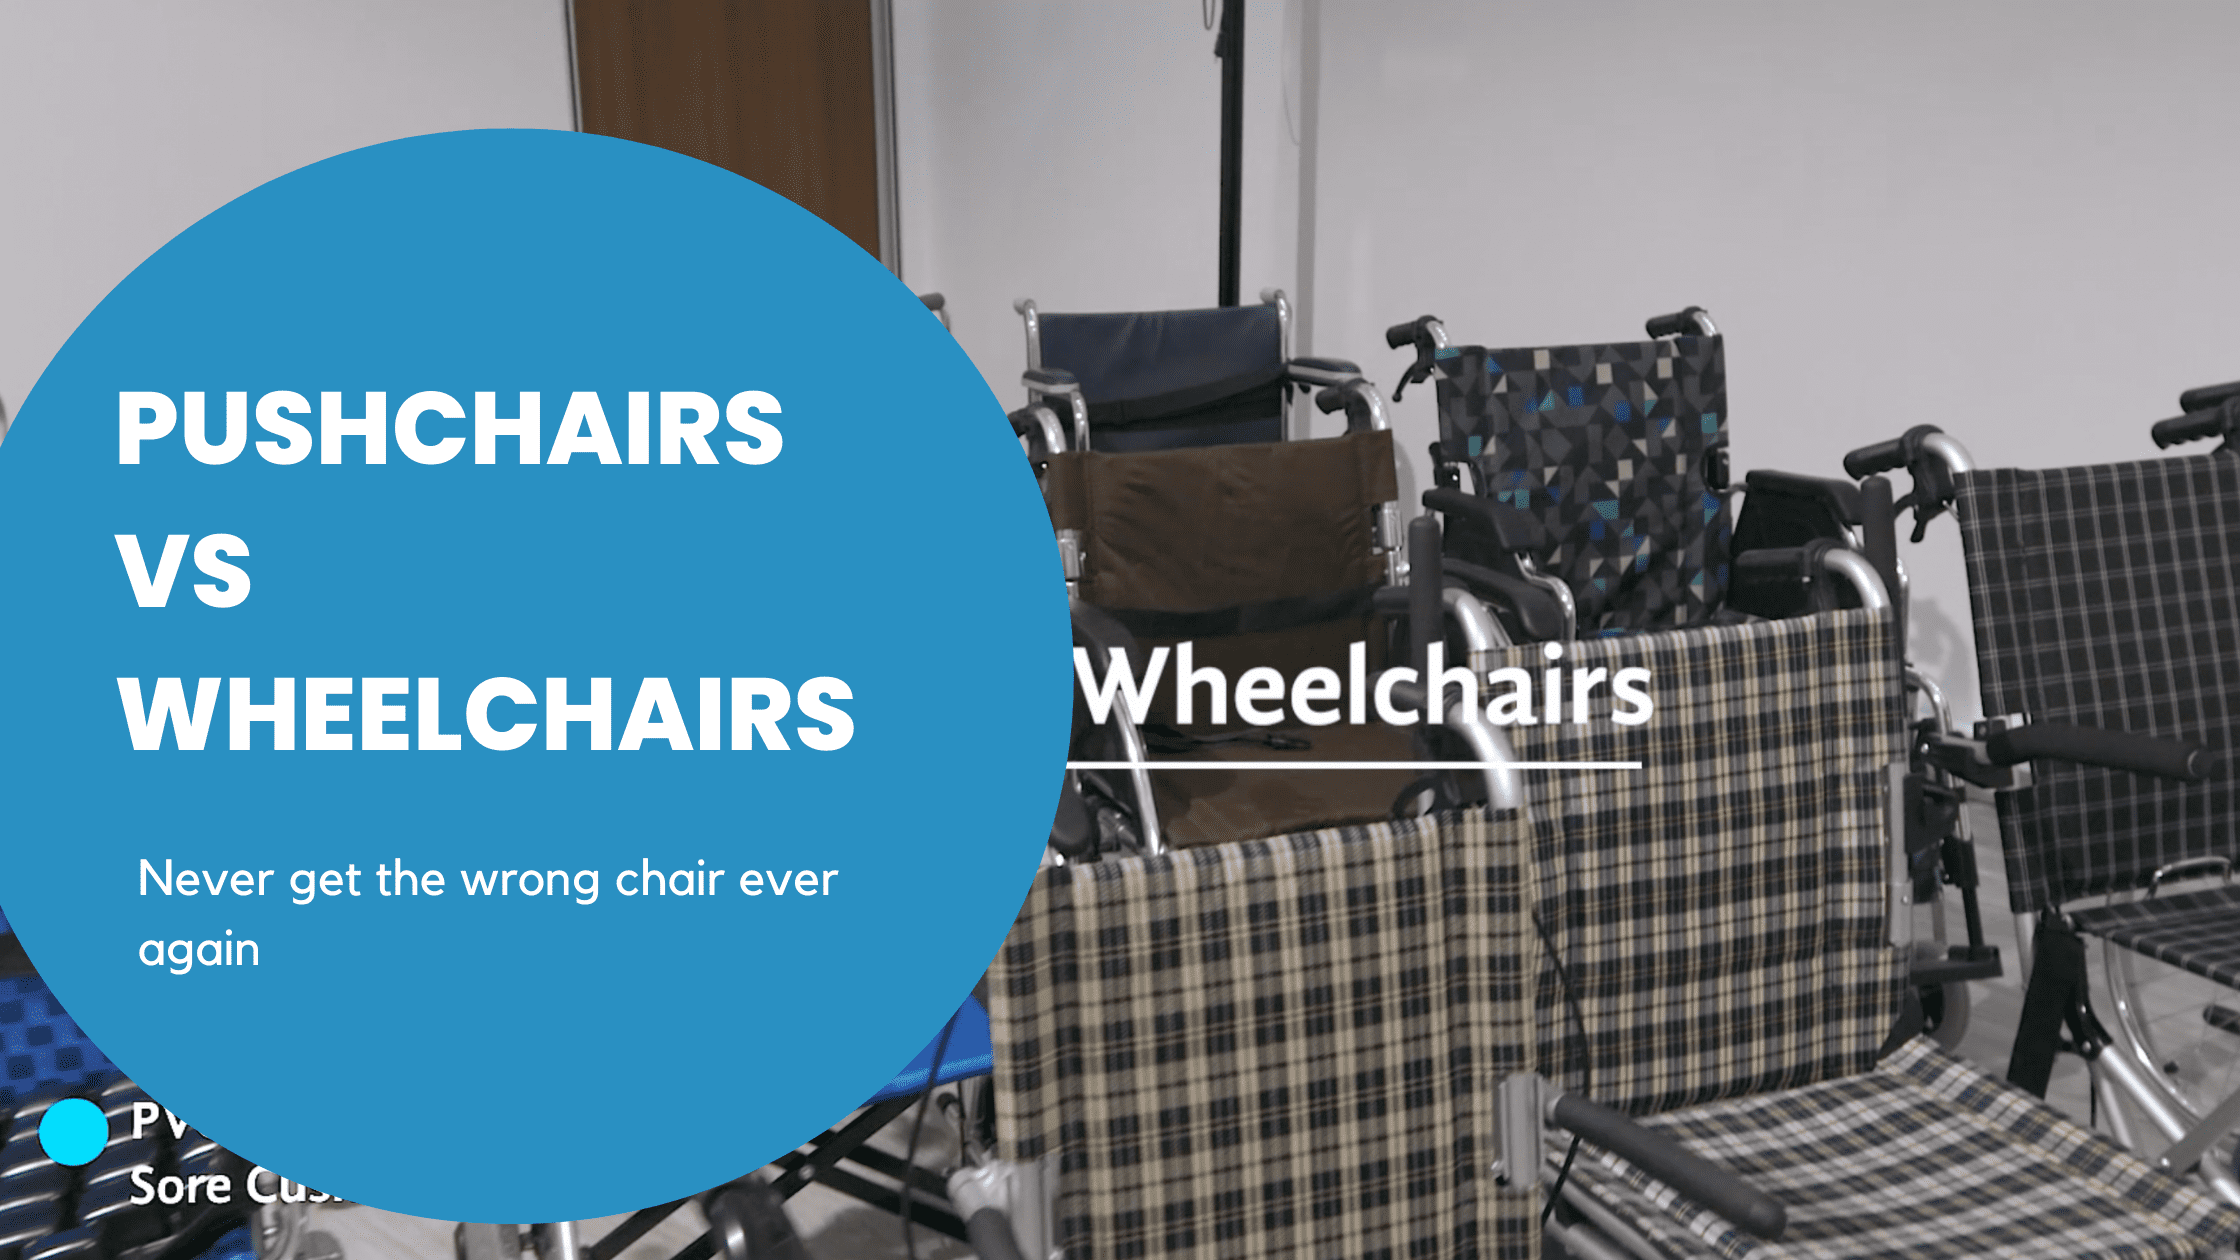 What are the differences between wheelchair and pushchairs